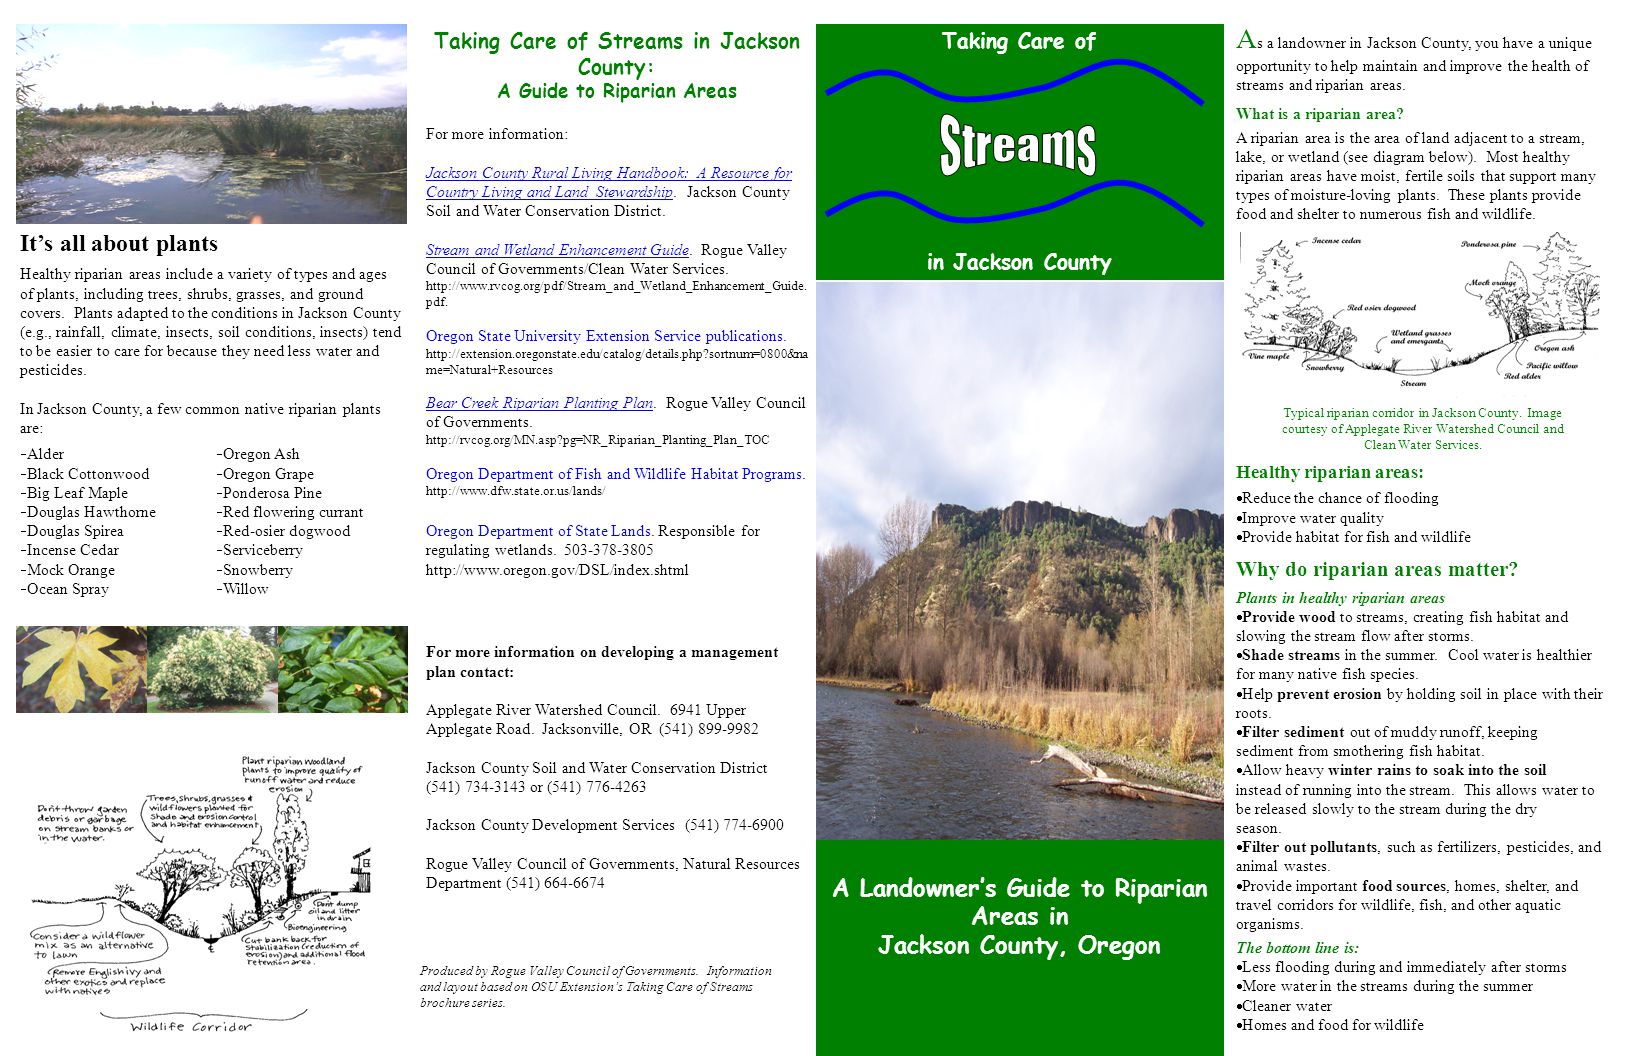 A Landowner’s Guide to Riparian Areas in Jackson County, Oregon Taking Care of in Jackson County Taking Care of Streams in Jackson County: A Guide to Riparian Areas For more information: Jackson County Rural Living Handbook: A Resource for Country Living and Land Stewardship.